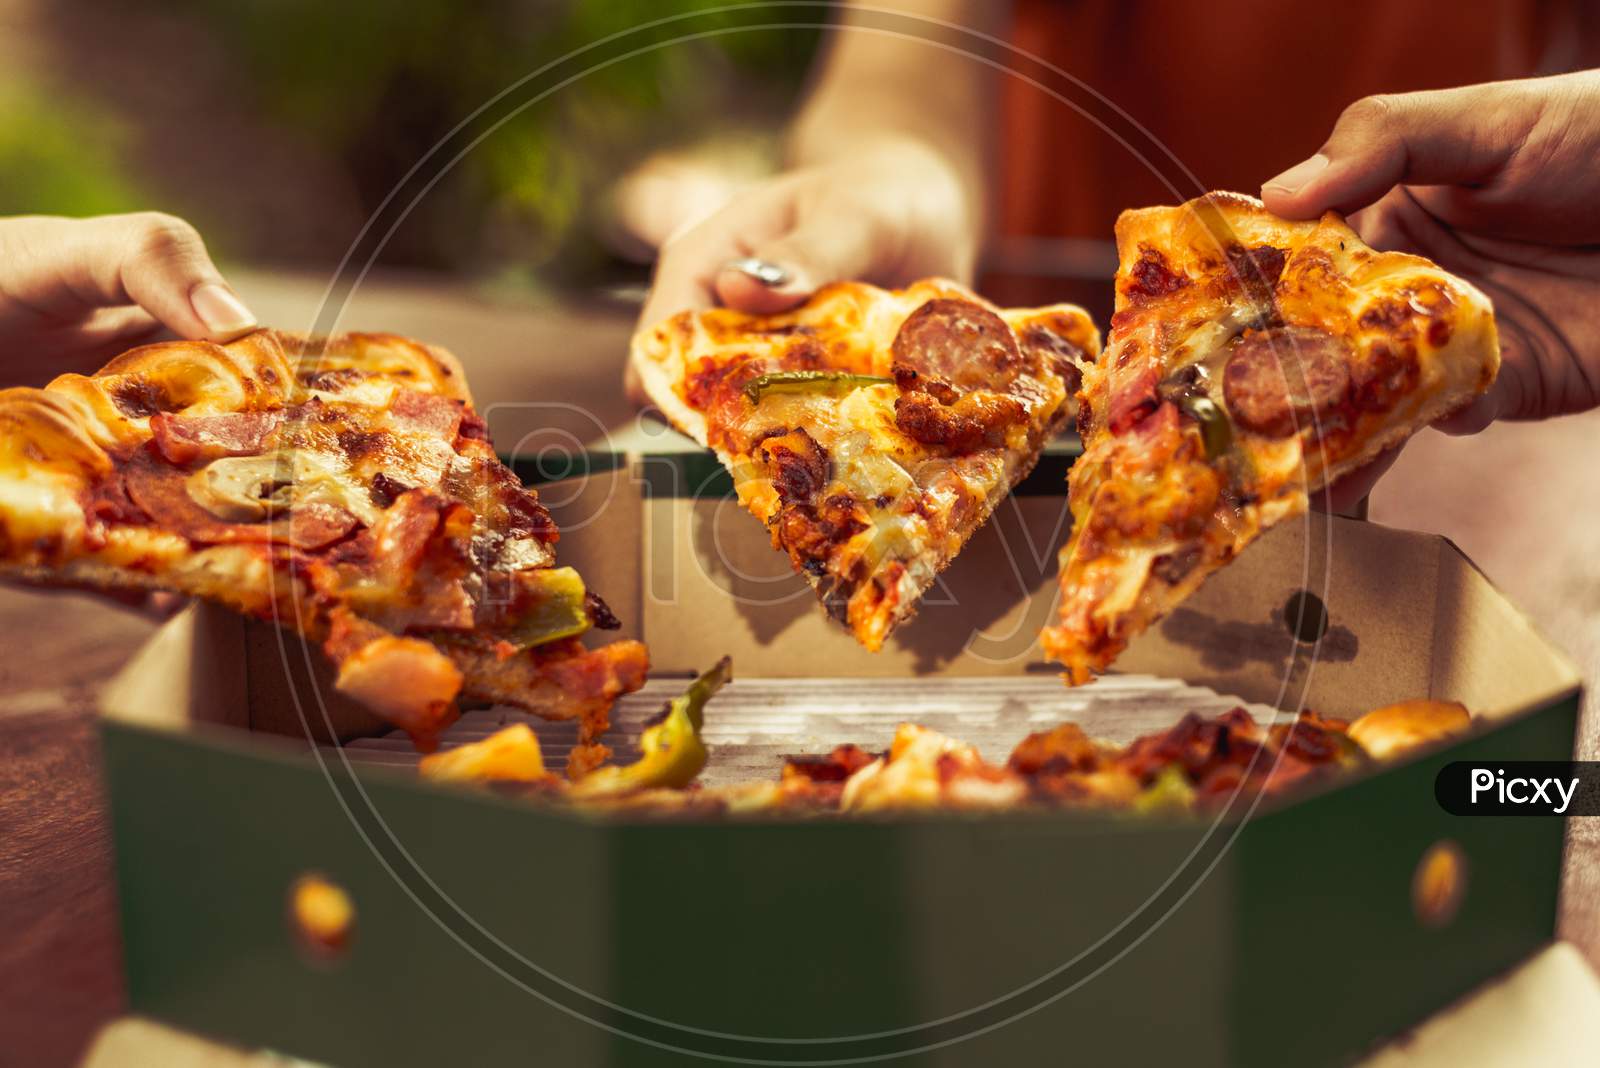 Close Up Of Sliced Hot Pizza Holding By Friendship People Hands For Celebration Party. Pizza Margarita Cuisine With Cheese And Sausage On Crispy Pan Delivery Service. Delicious And Tasty Italian Food